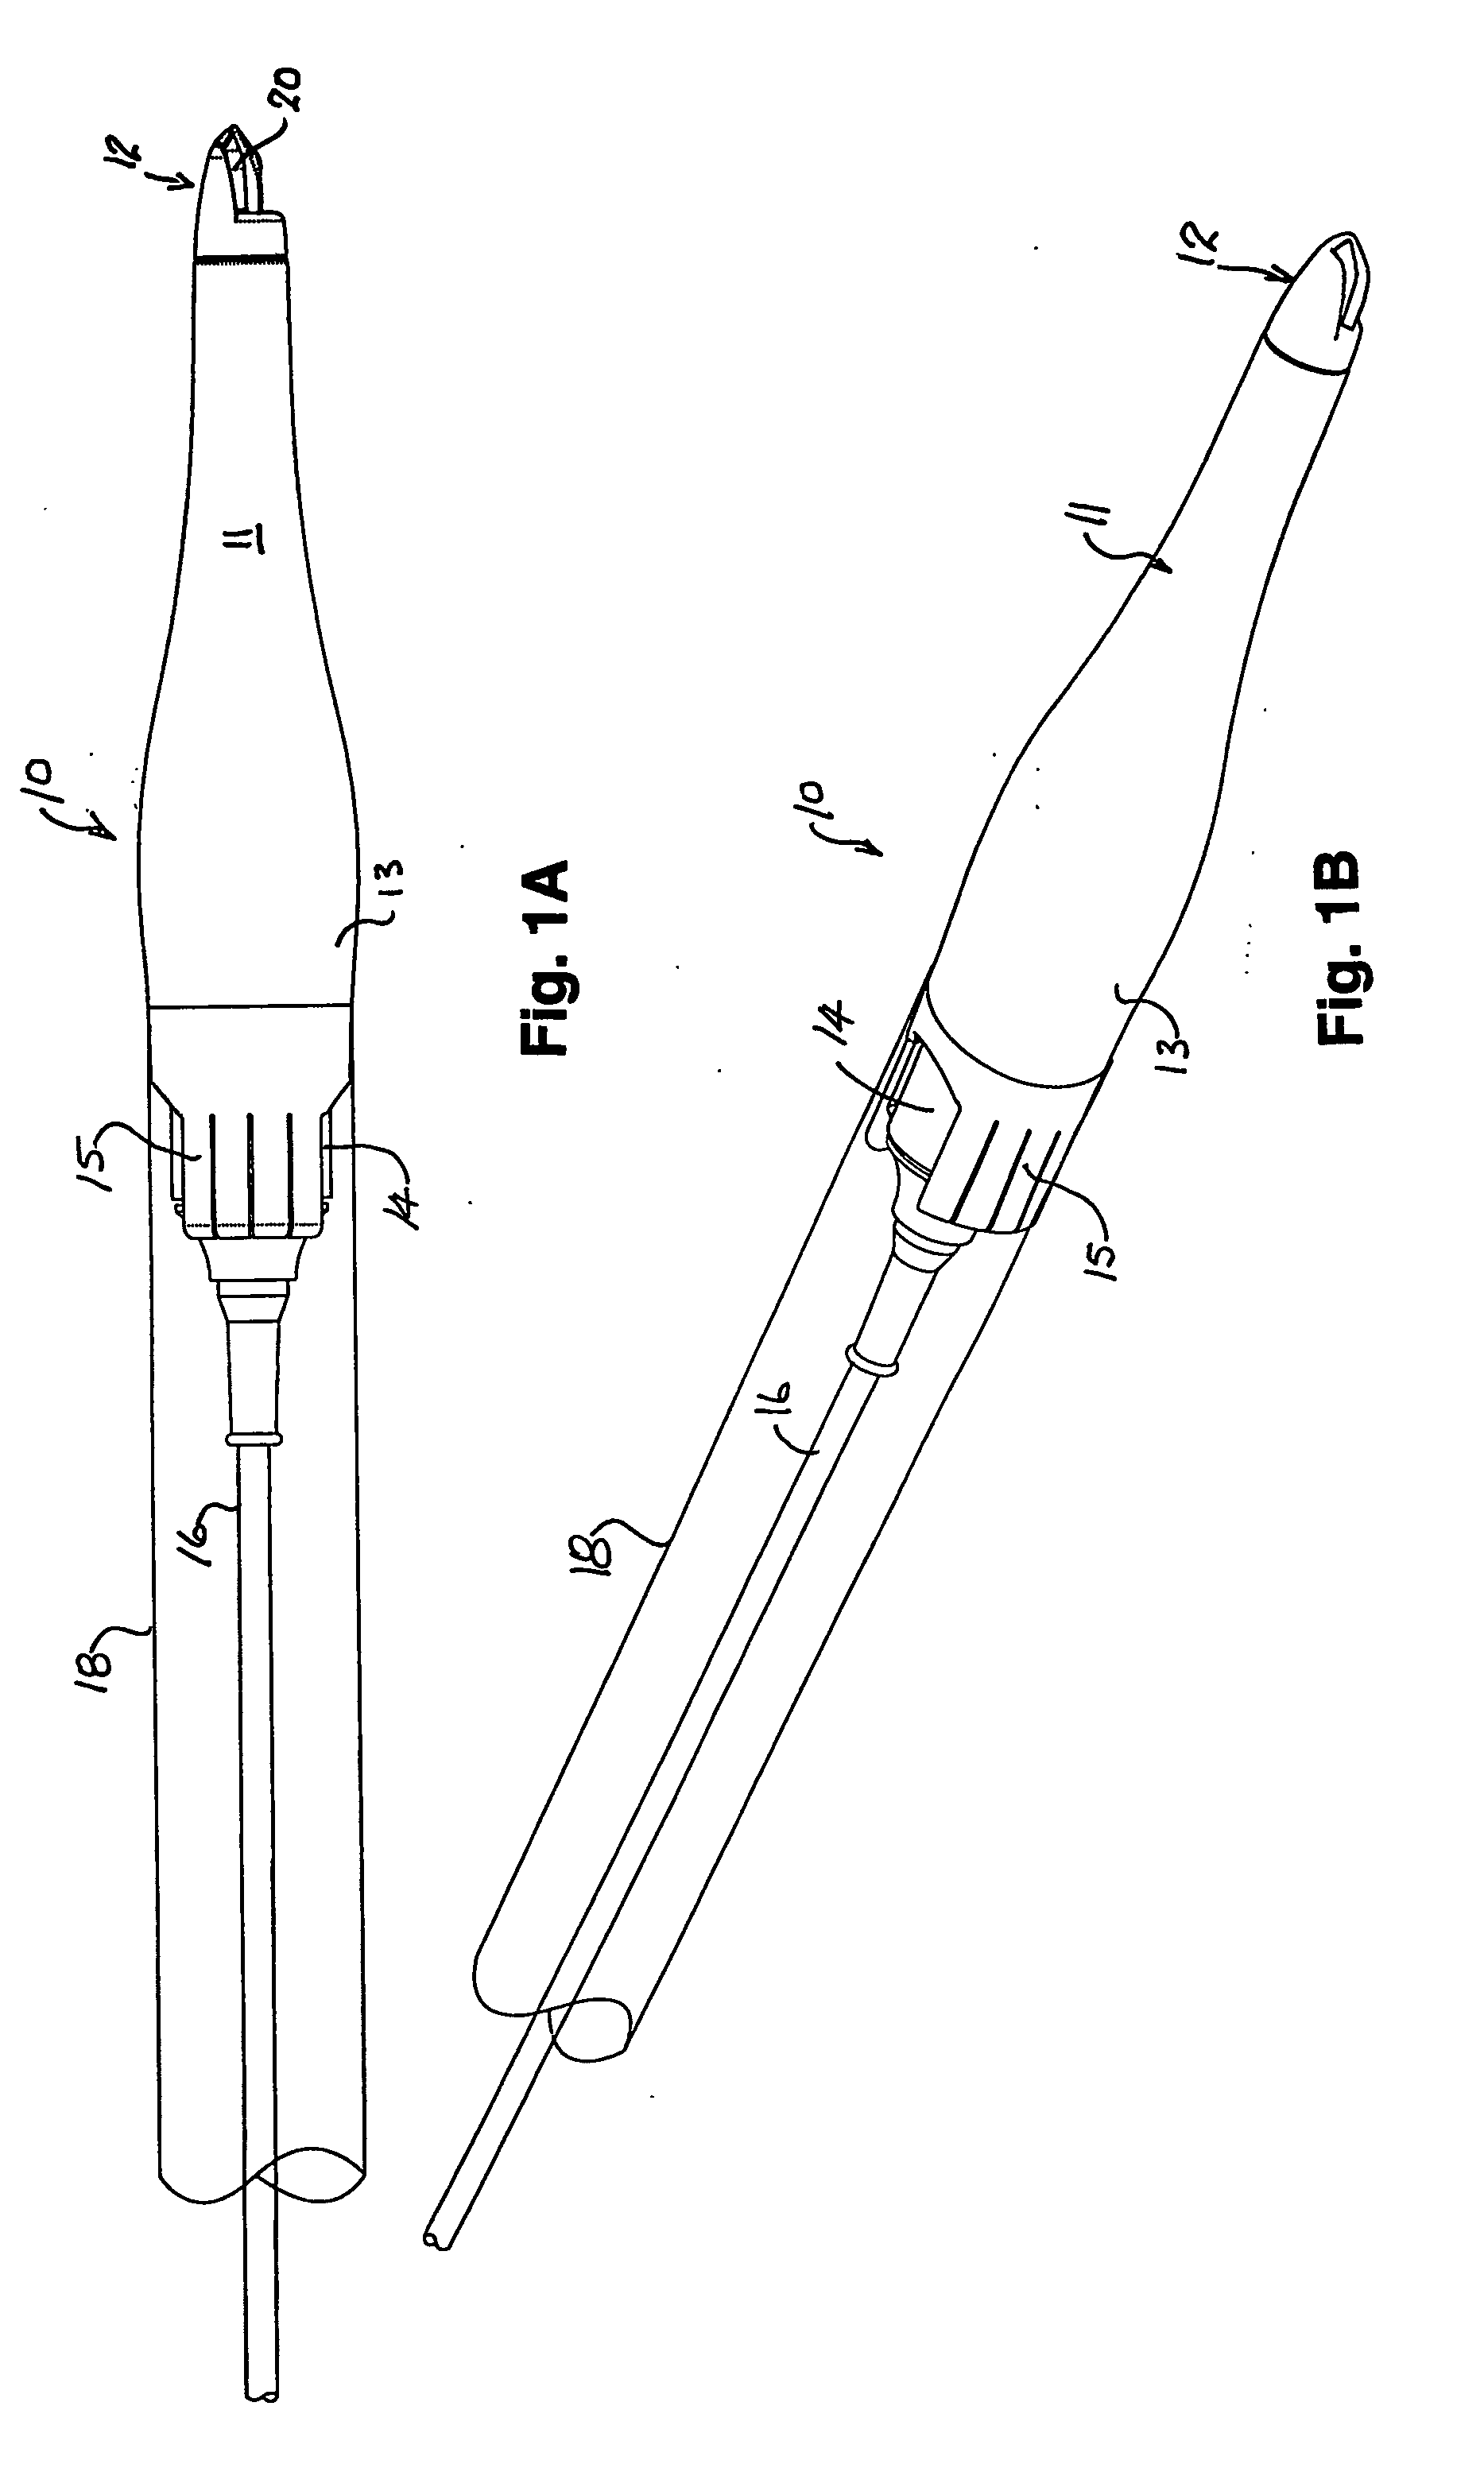 Method and apparatus for treating skin